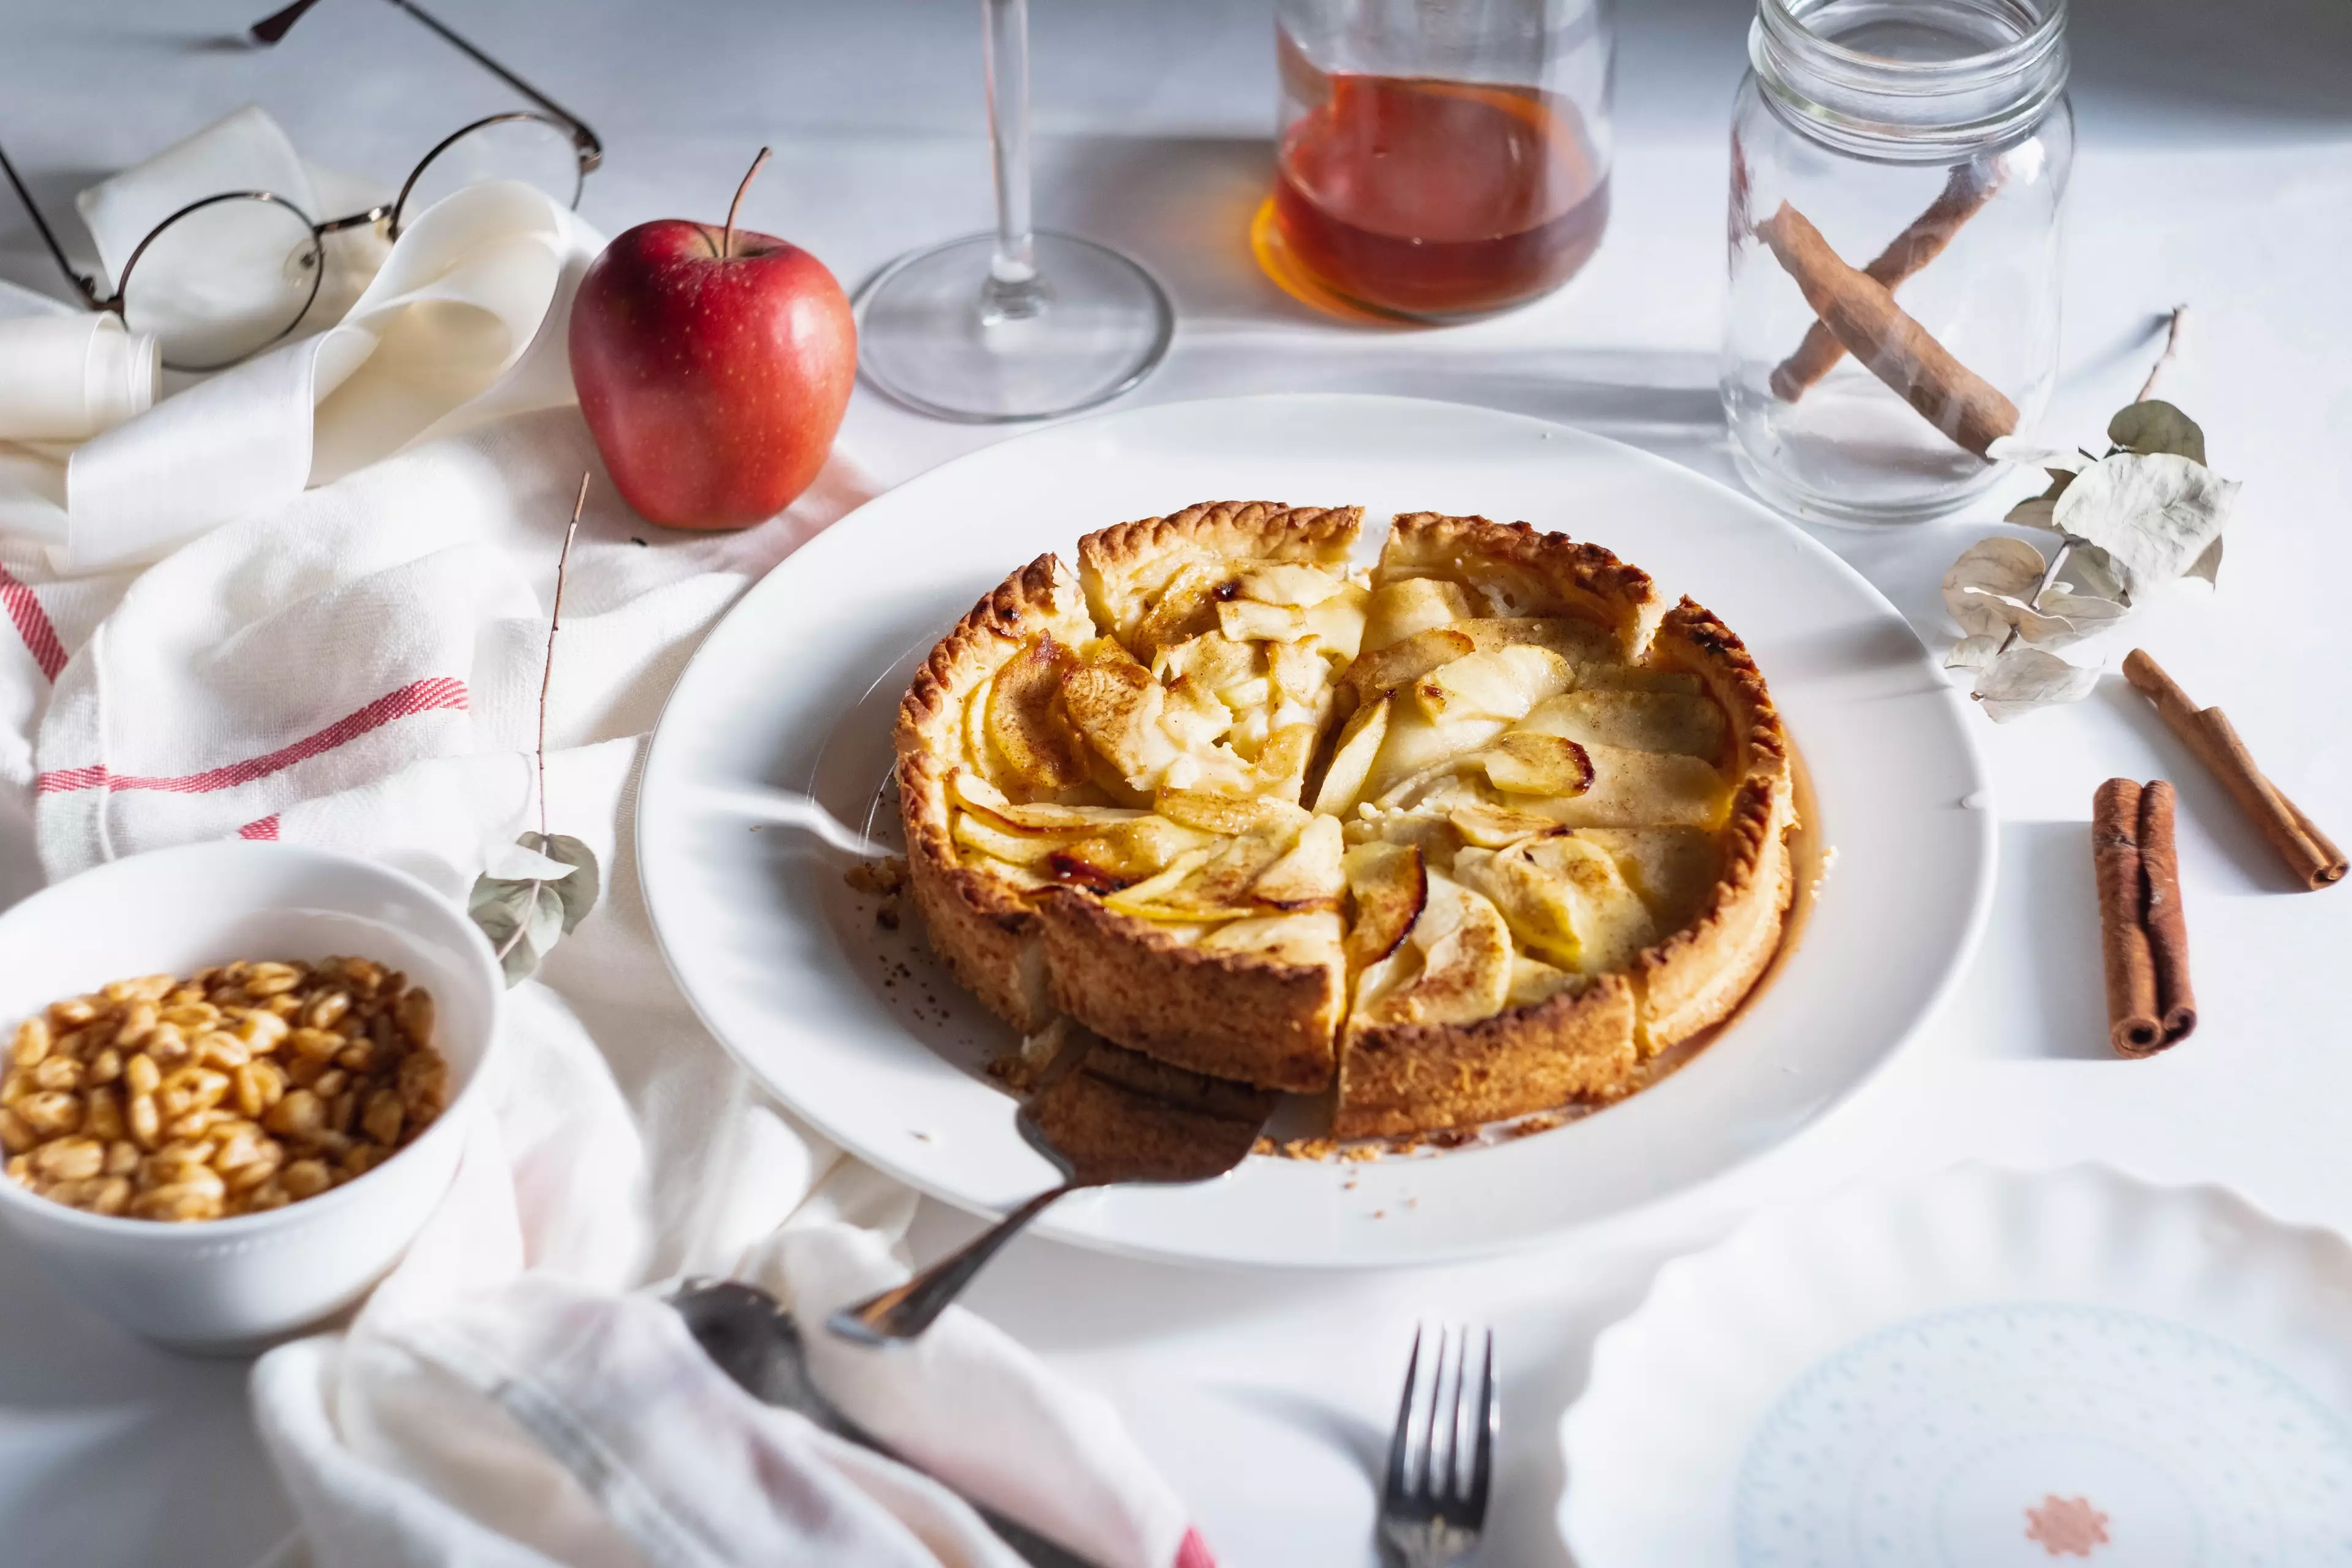 Drizzle the Baileys over your apple pie (